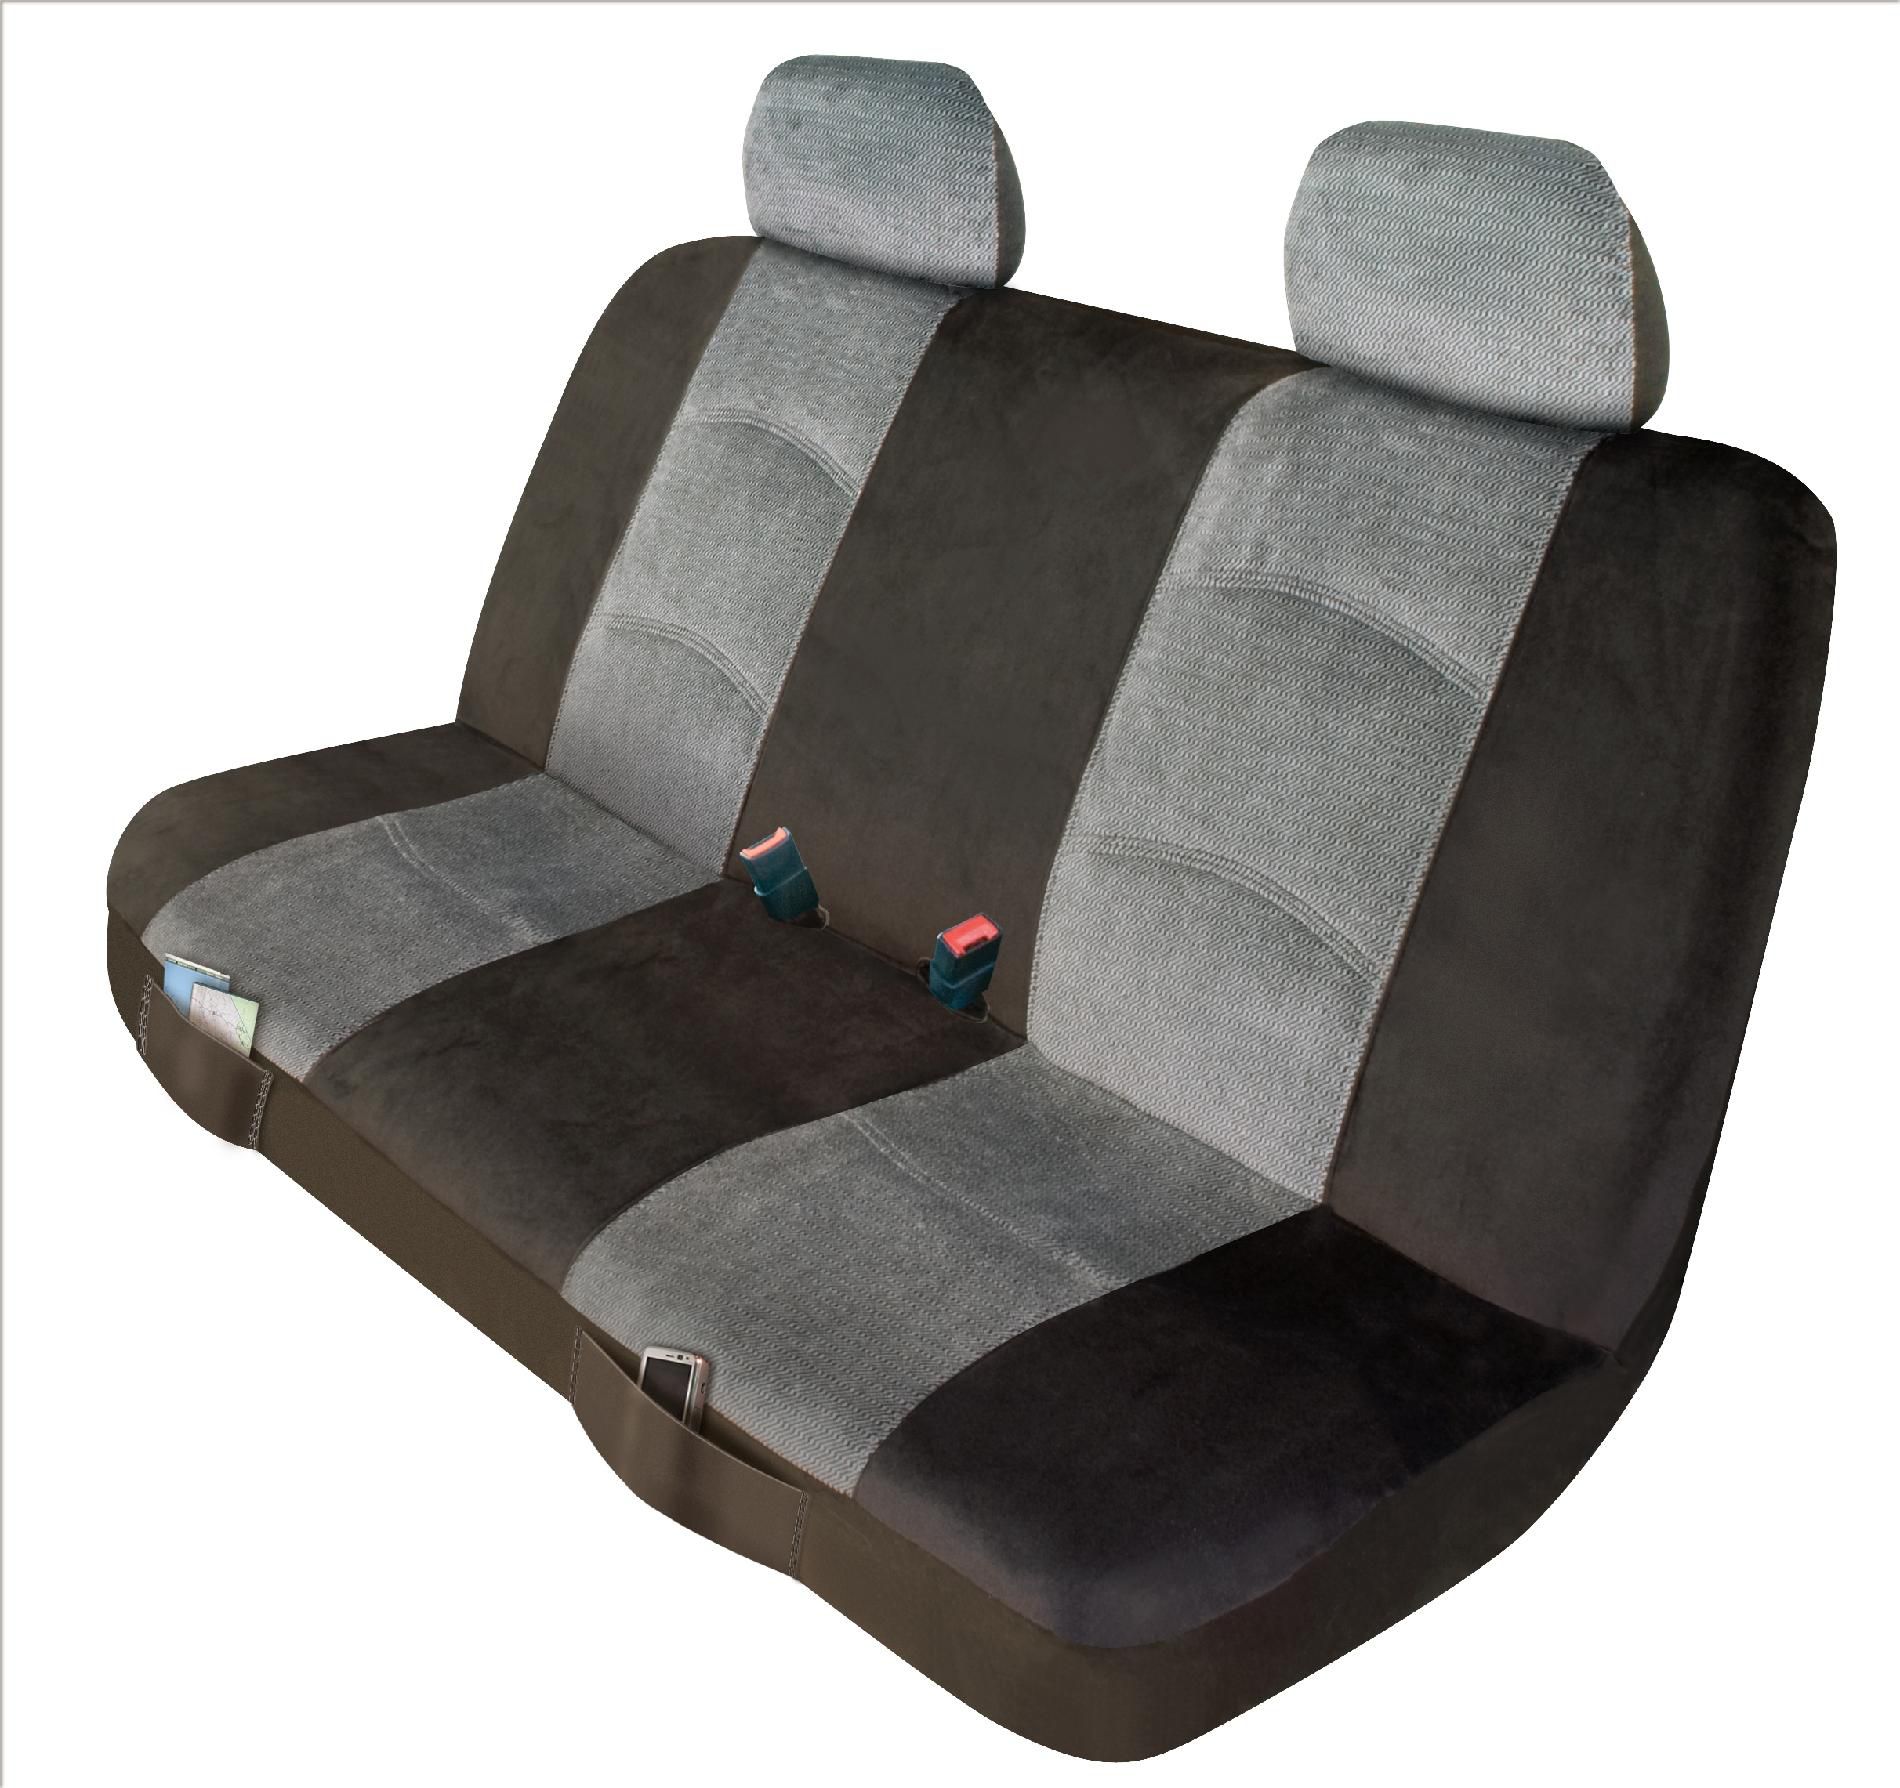 Elegant USA Universal Bench Seat Cover - Micro/Tweed Greay